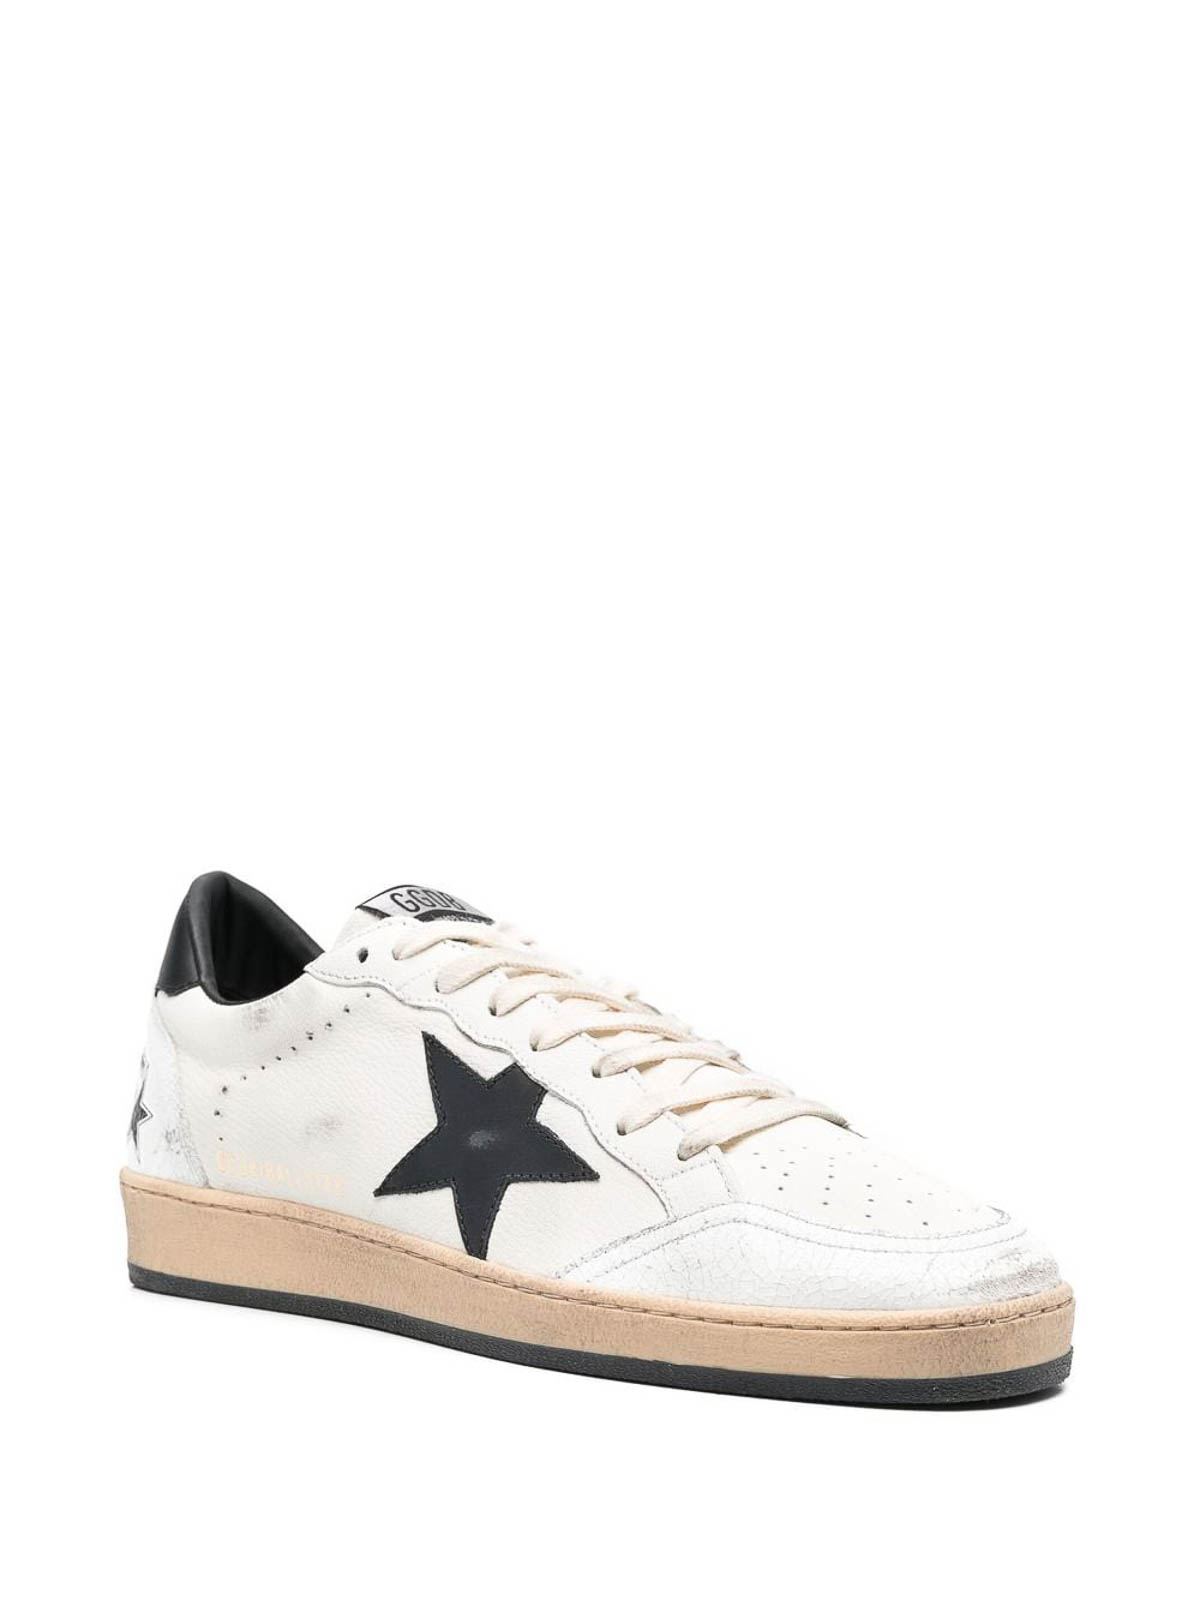 Shop Golden Goose Ball Star Nappa Sneakers In White